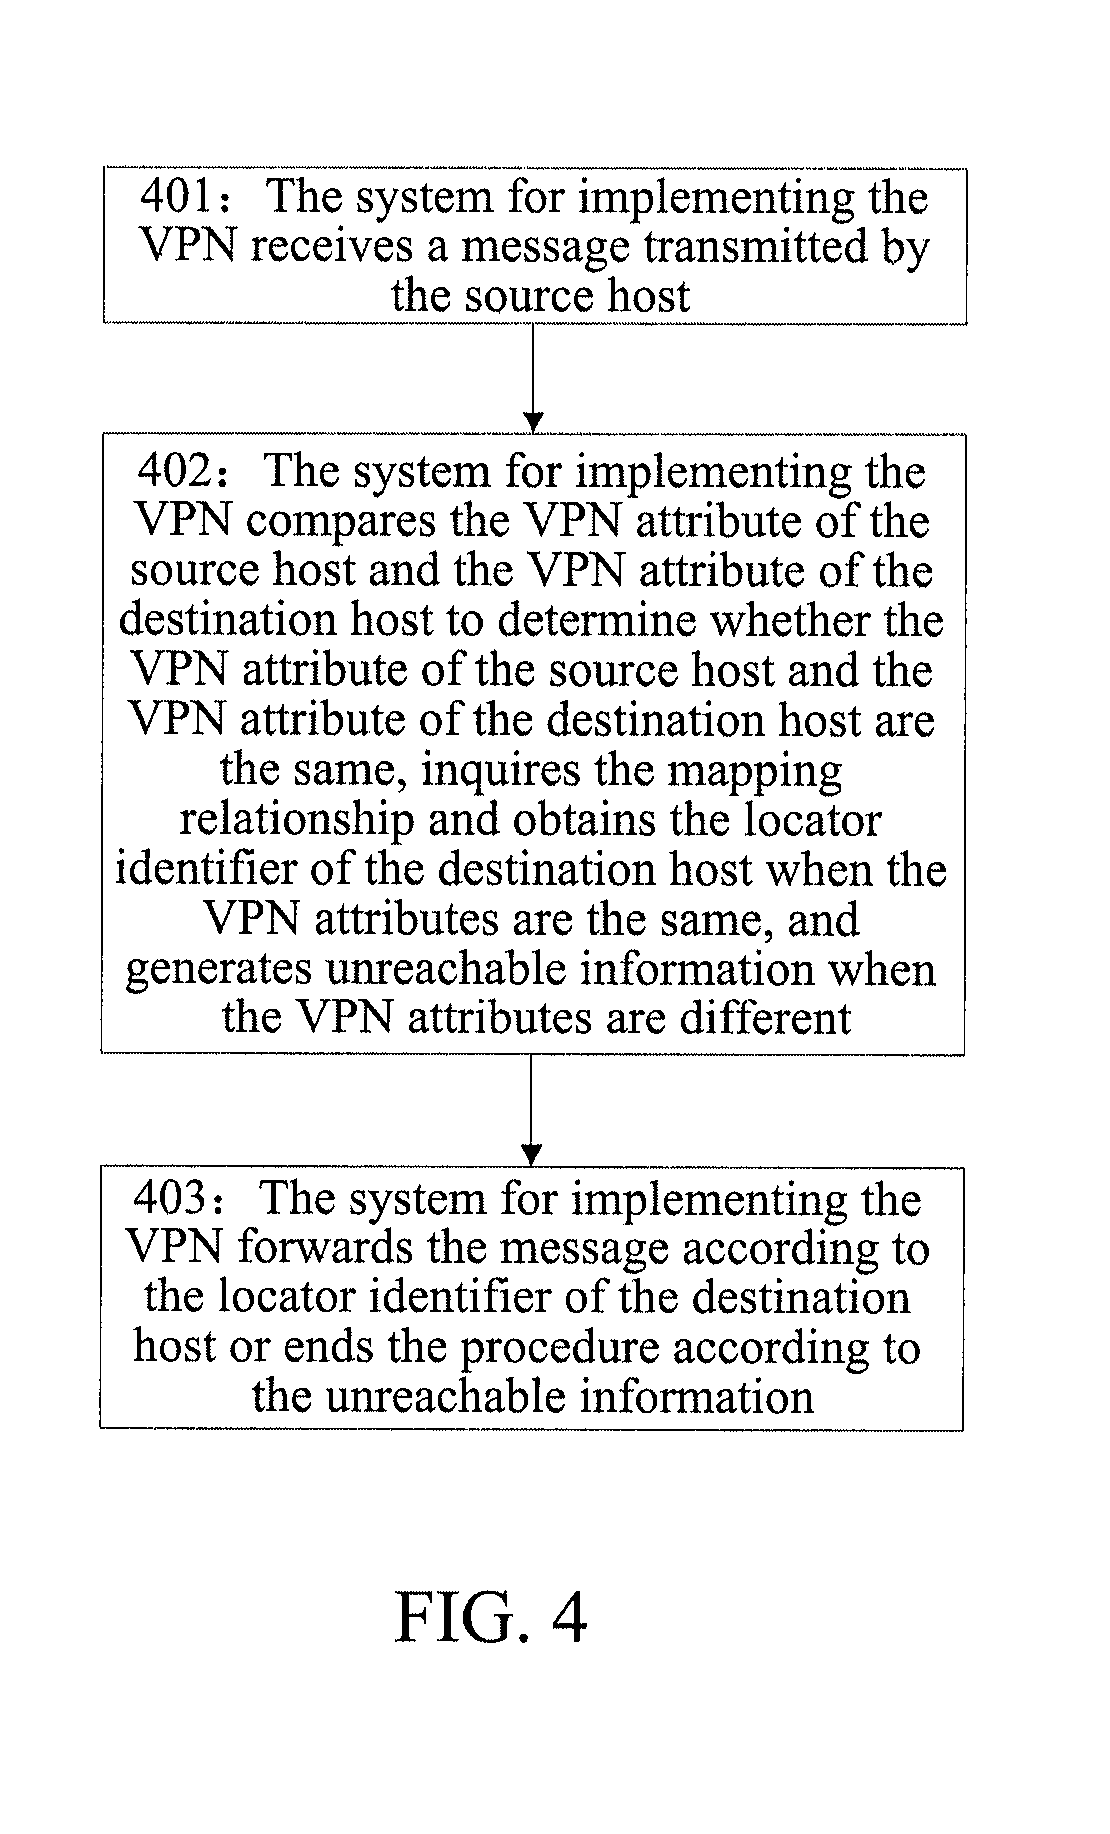 Virtual private network implementation method and system